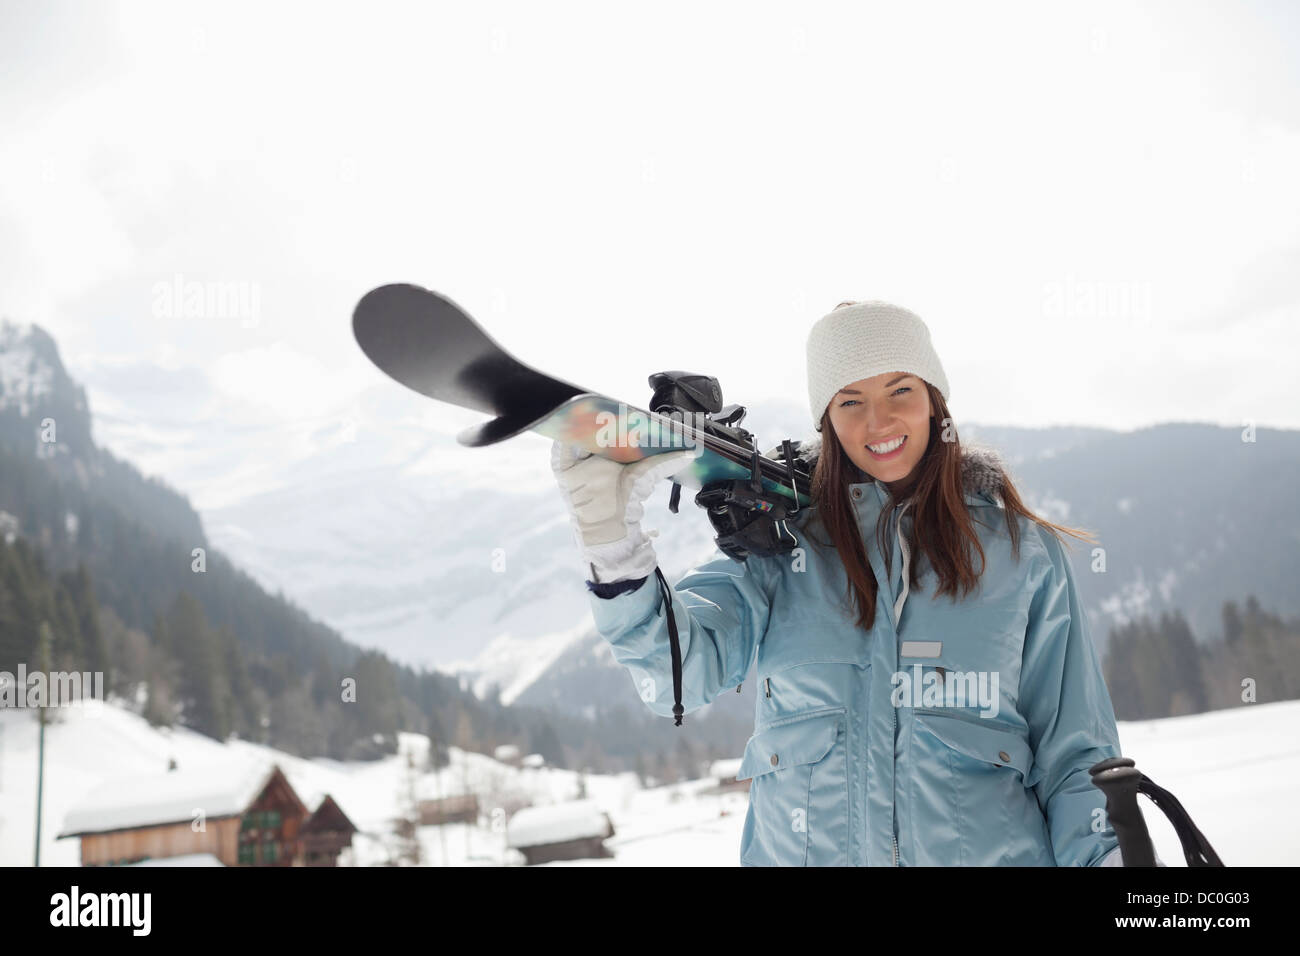 Portrait of enthusiastic woman carrying skis in snowy field Stock Photo